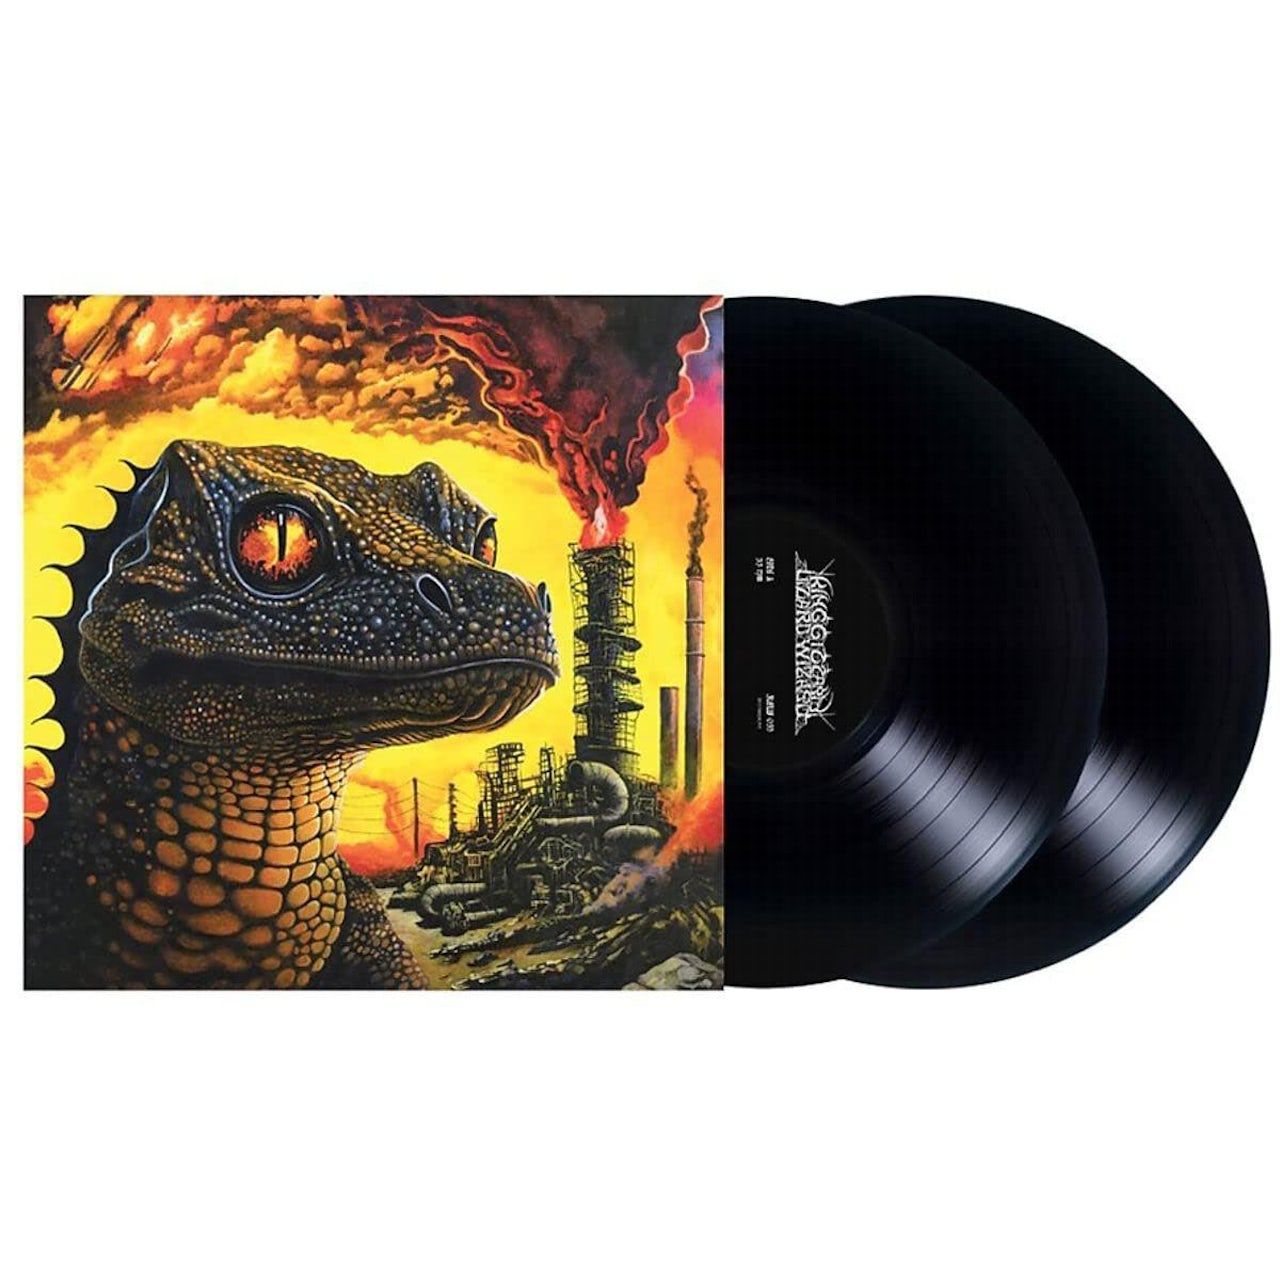 0842812189524, Виниловая пластинка King Gizzard & The Lizard Wizard, Petrodragonic Apocalypse; Or, Dawn Of Eternal Night: An Annihilation Of Planet Earth And The Beginning Of Merciless Damnation (coloured) king gizzard and the lizard wizard виниловая пластинка king gizzard and the lizard wizard butterfly 3001